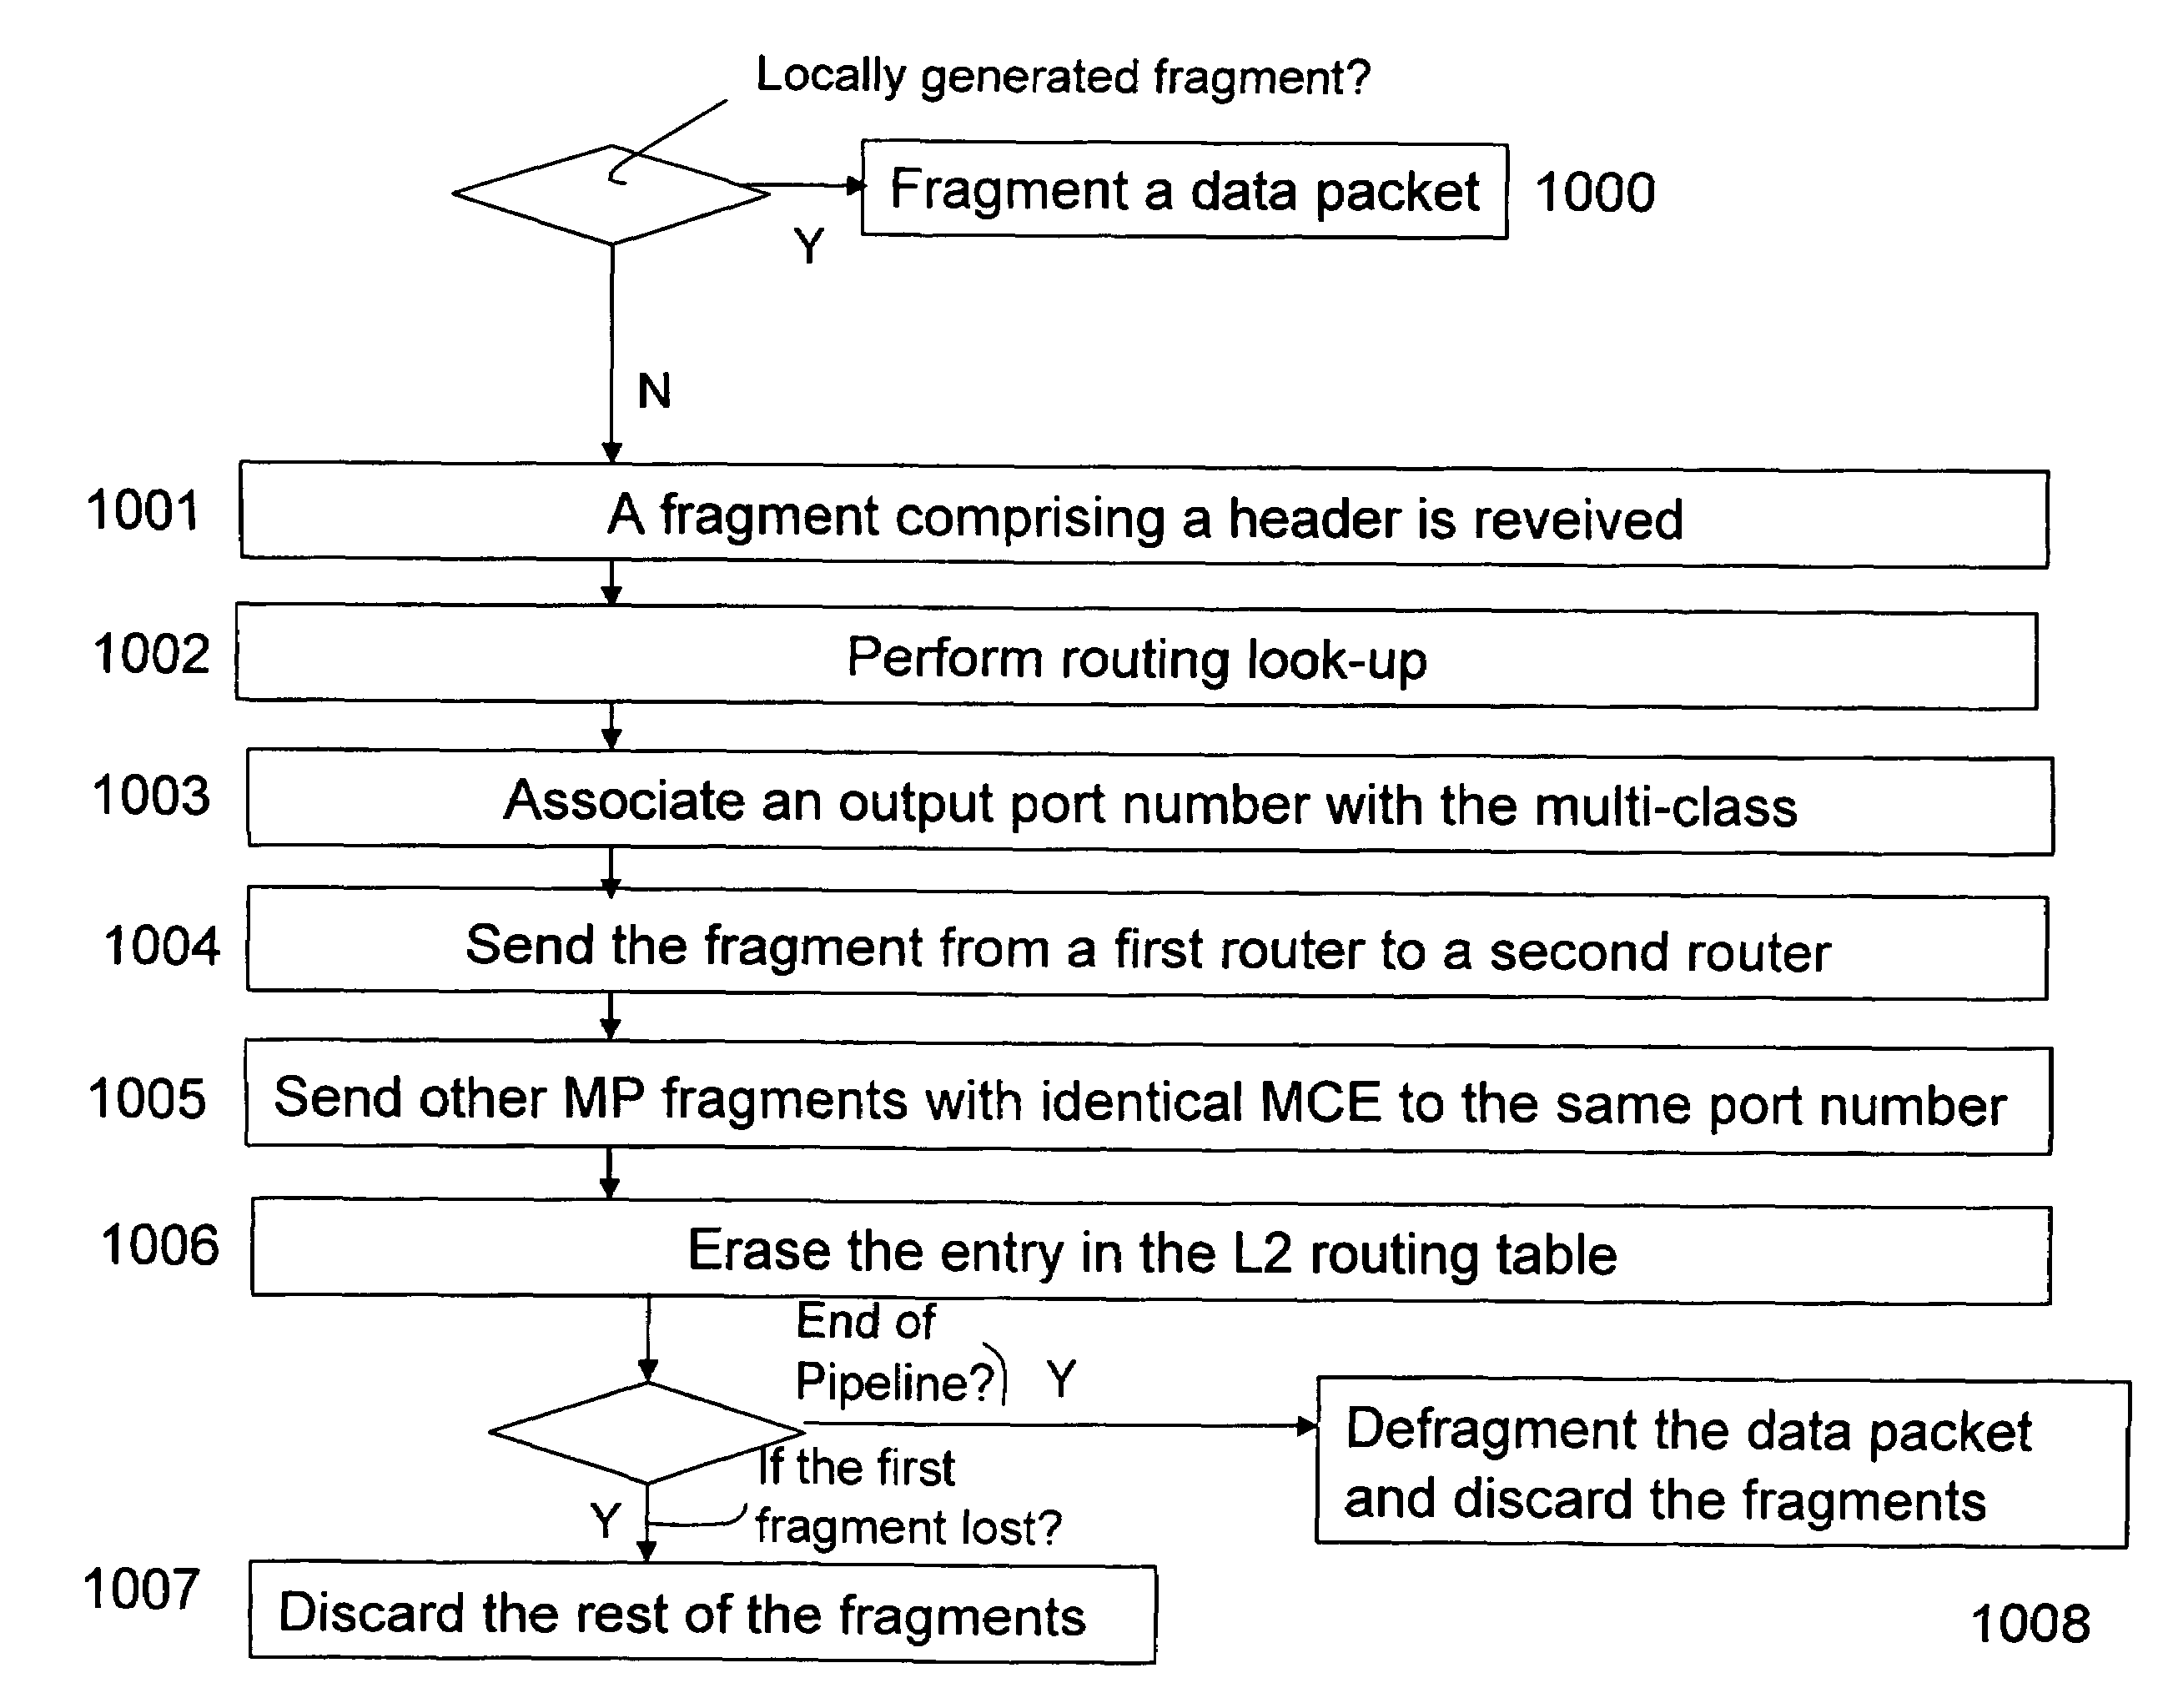 Reducing transmission time for data packets controlled by a link layer protocol comprising a fragmenting/defragmenting capability